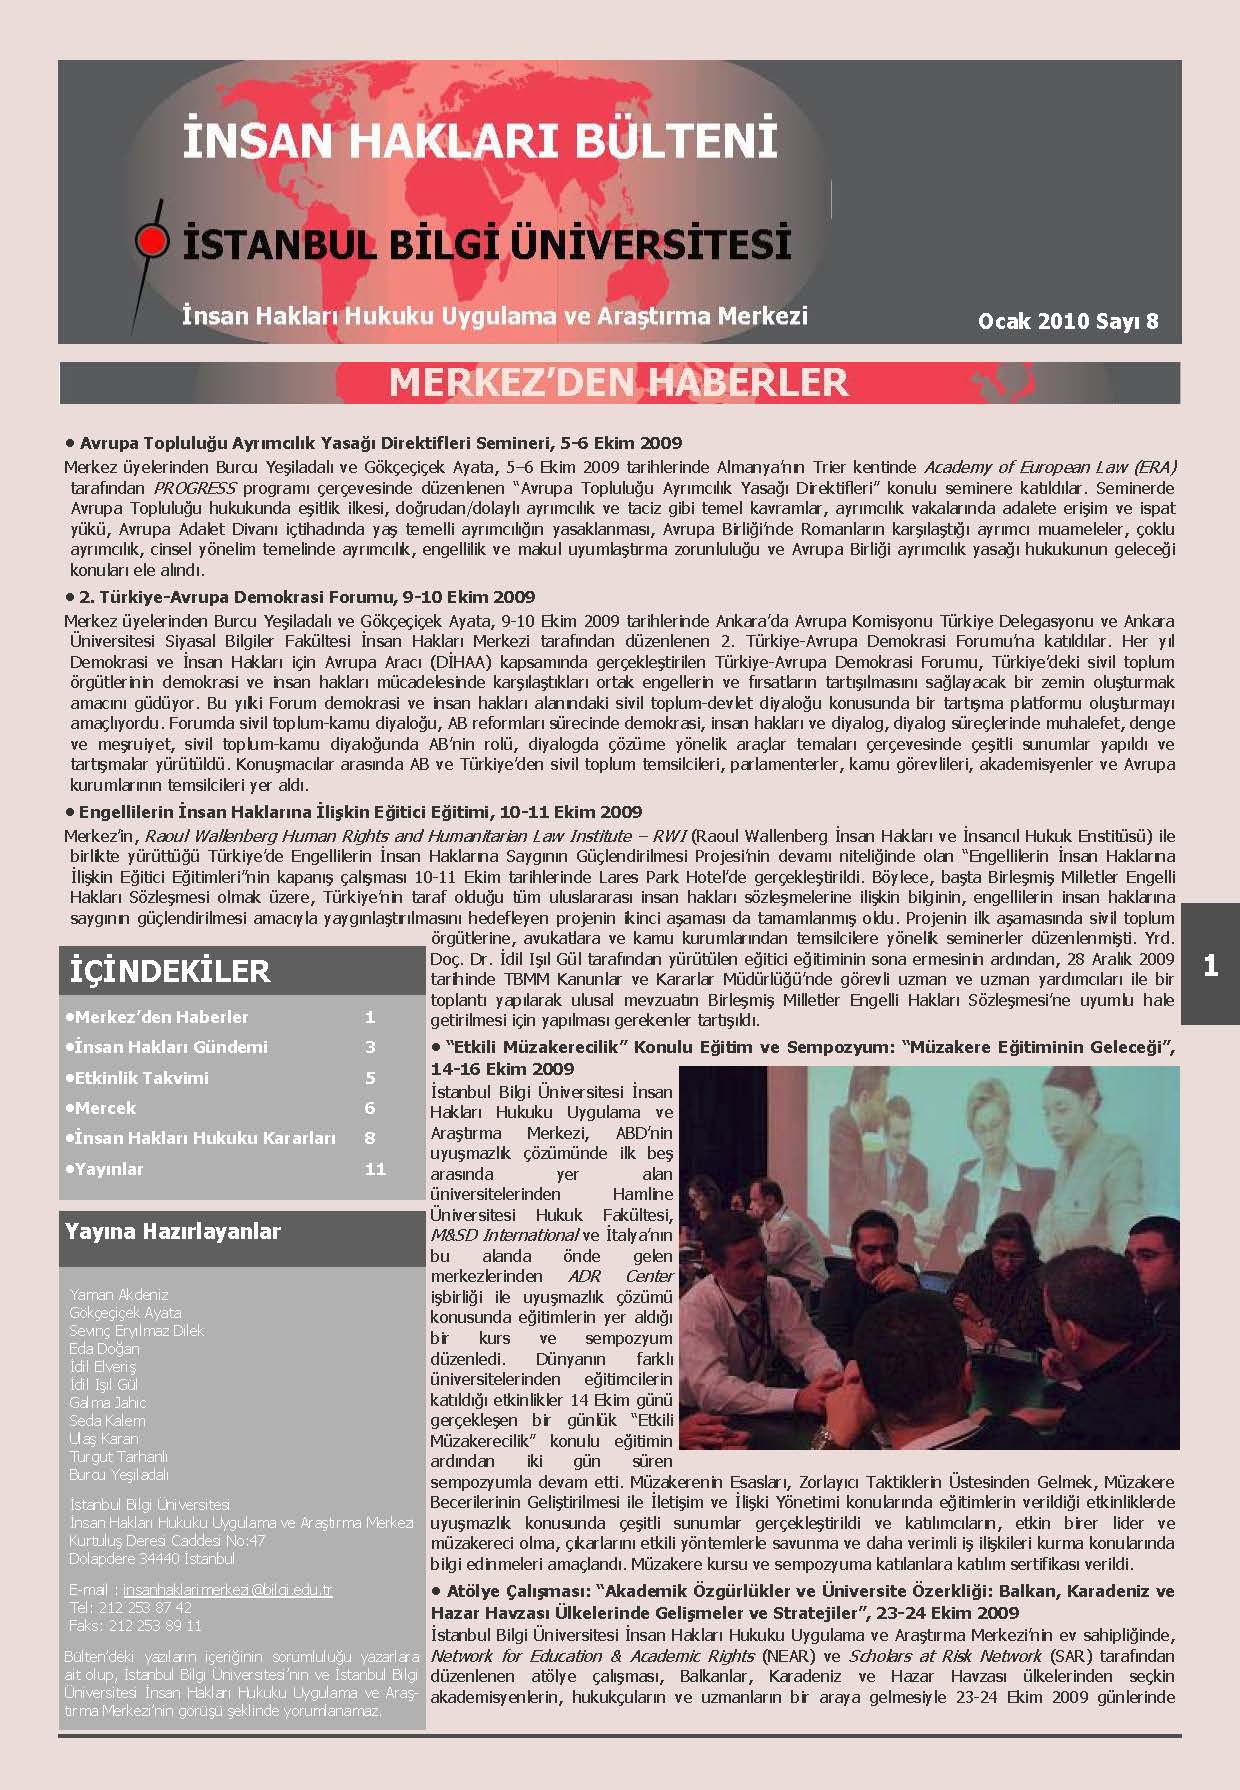 Human Rights Bulletin, January 2010, Issue 8